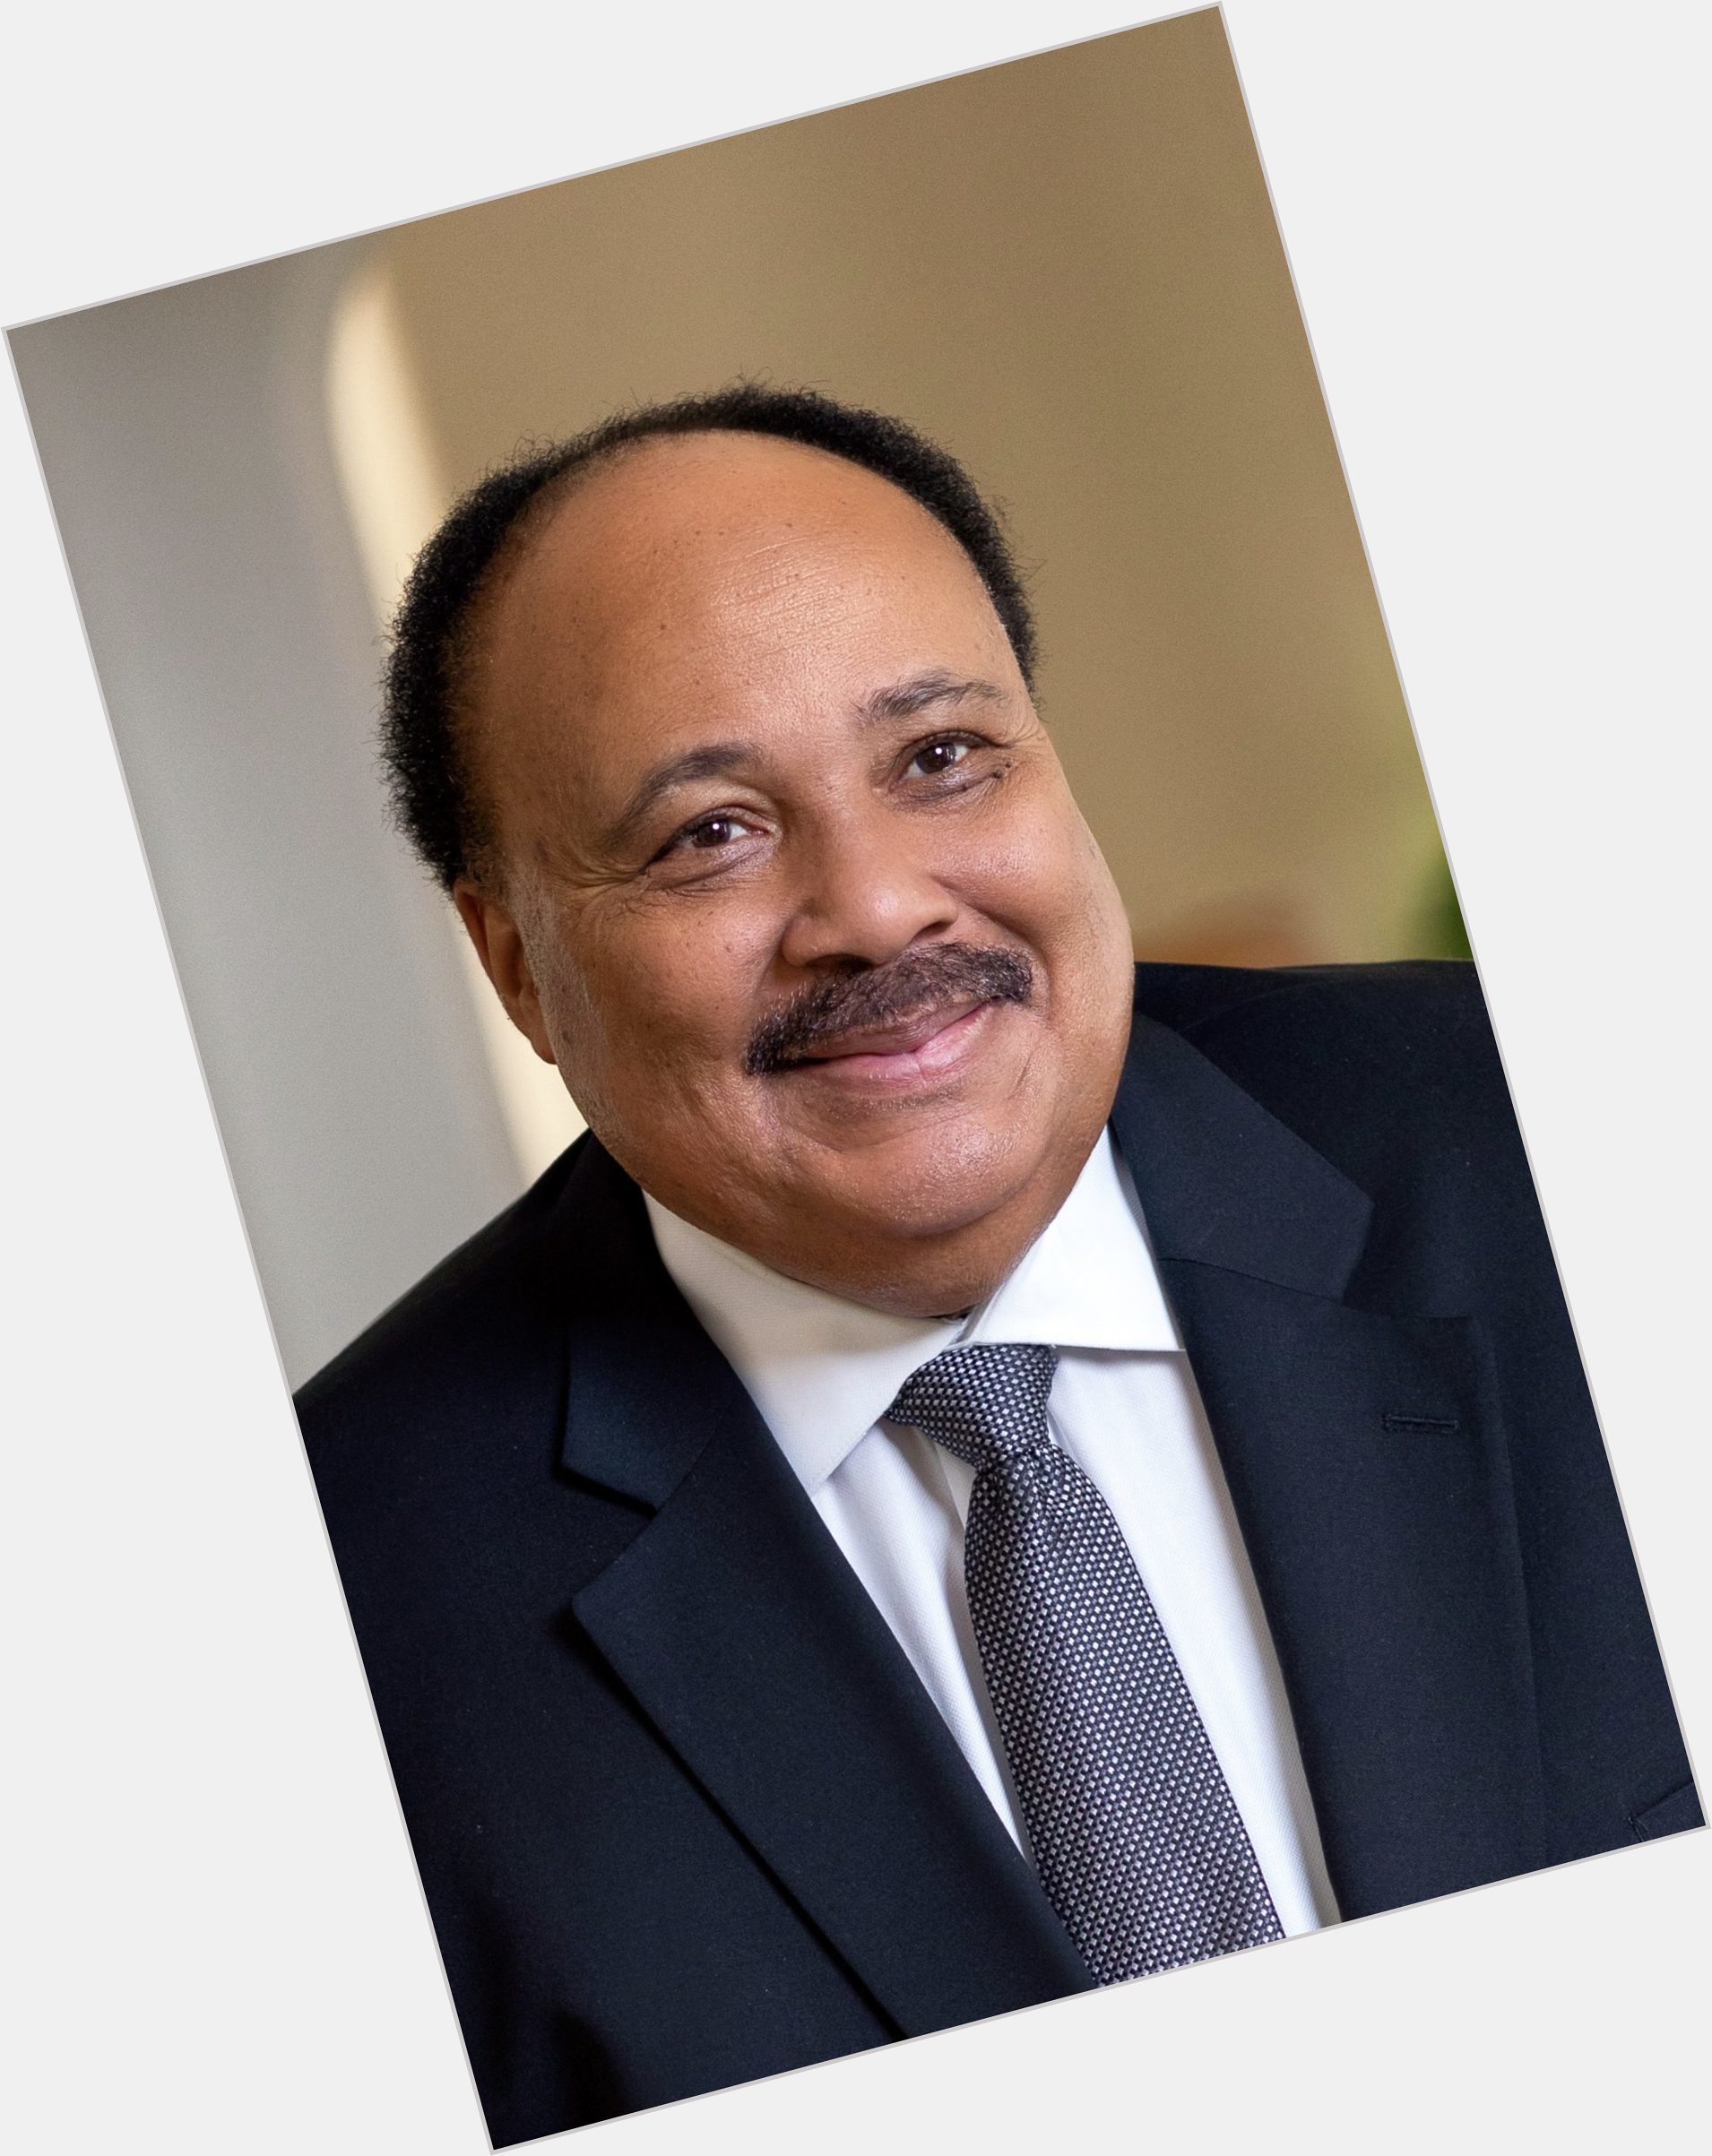 Martin Luther King Iii new pic 1